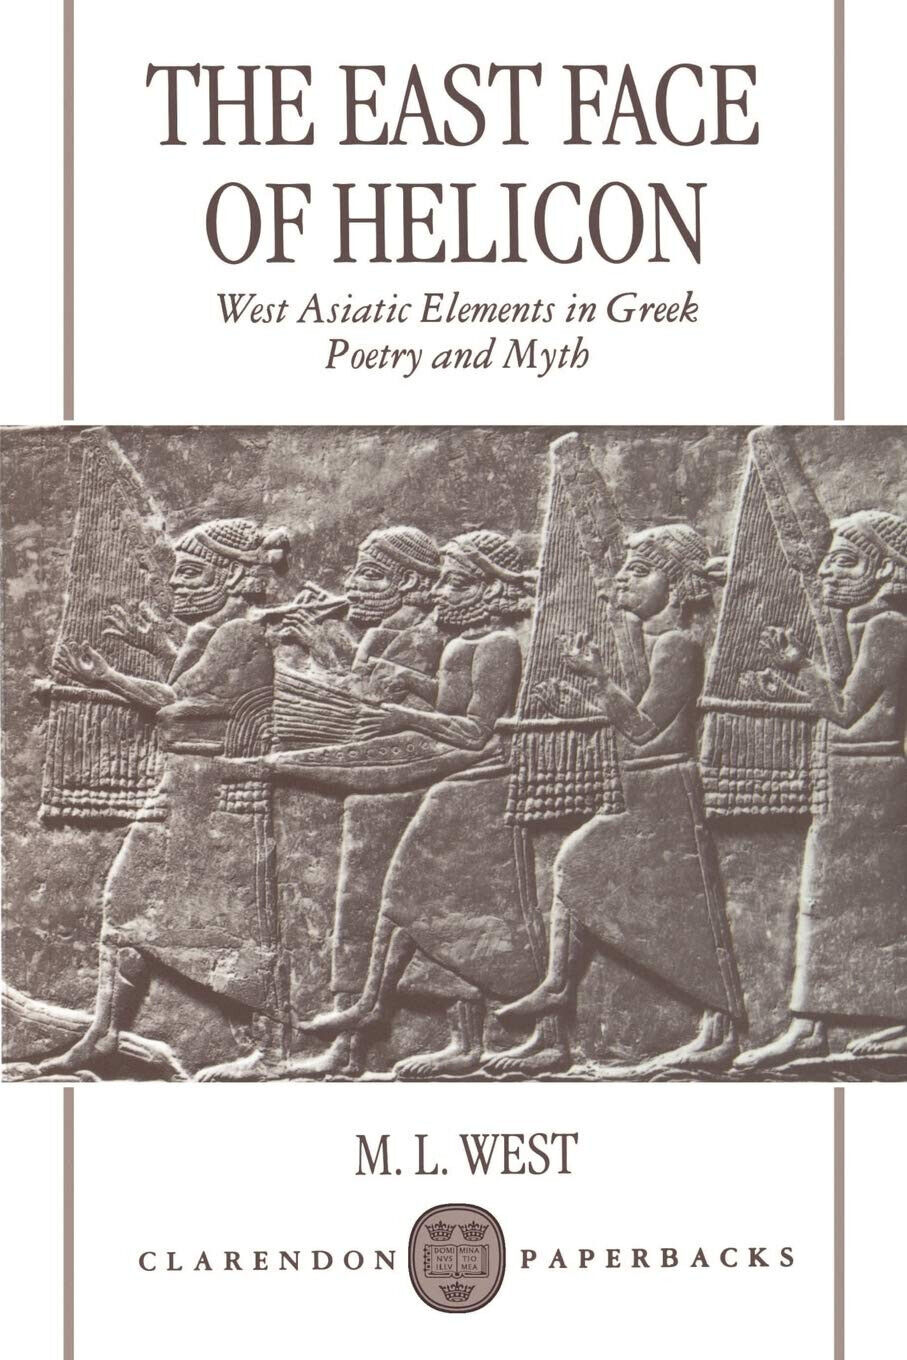 The East Face of Helicon - M. L. West - Oxford, 1999 libro usato